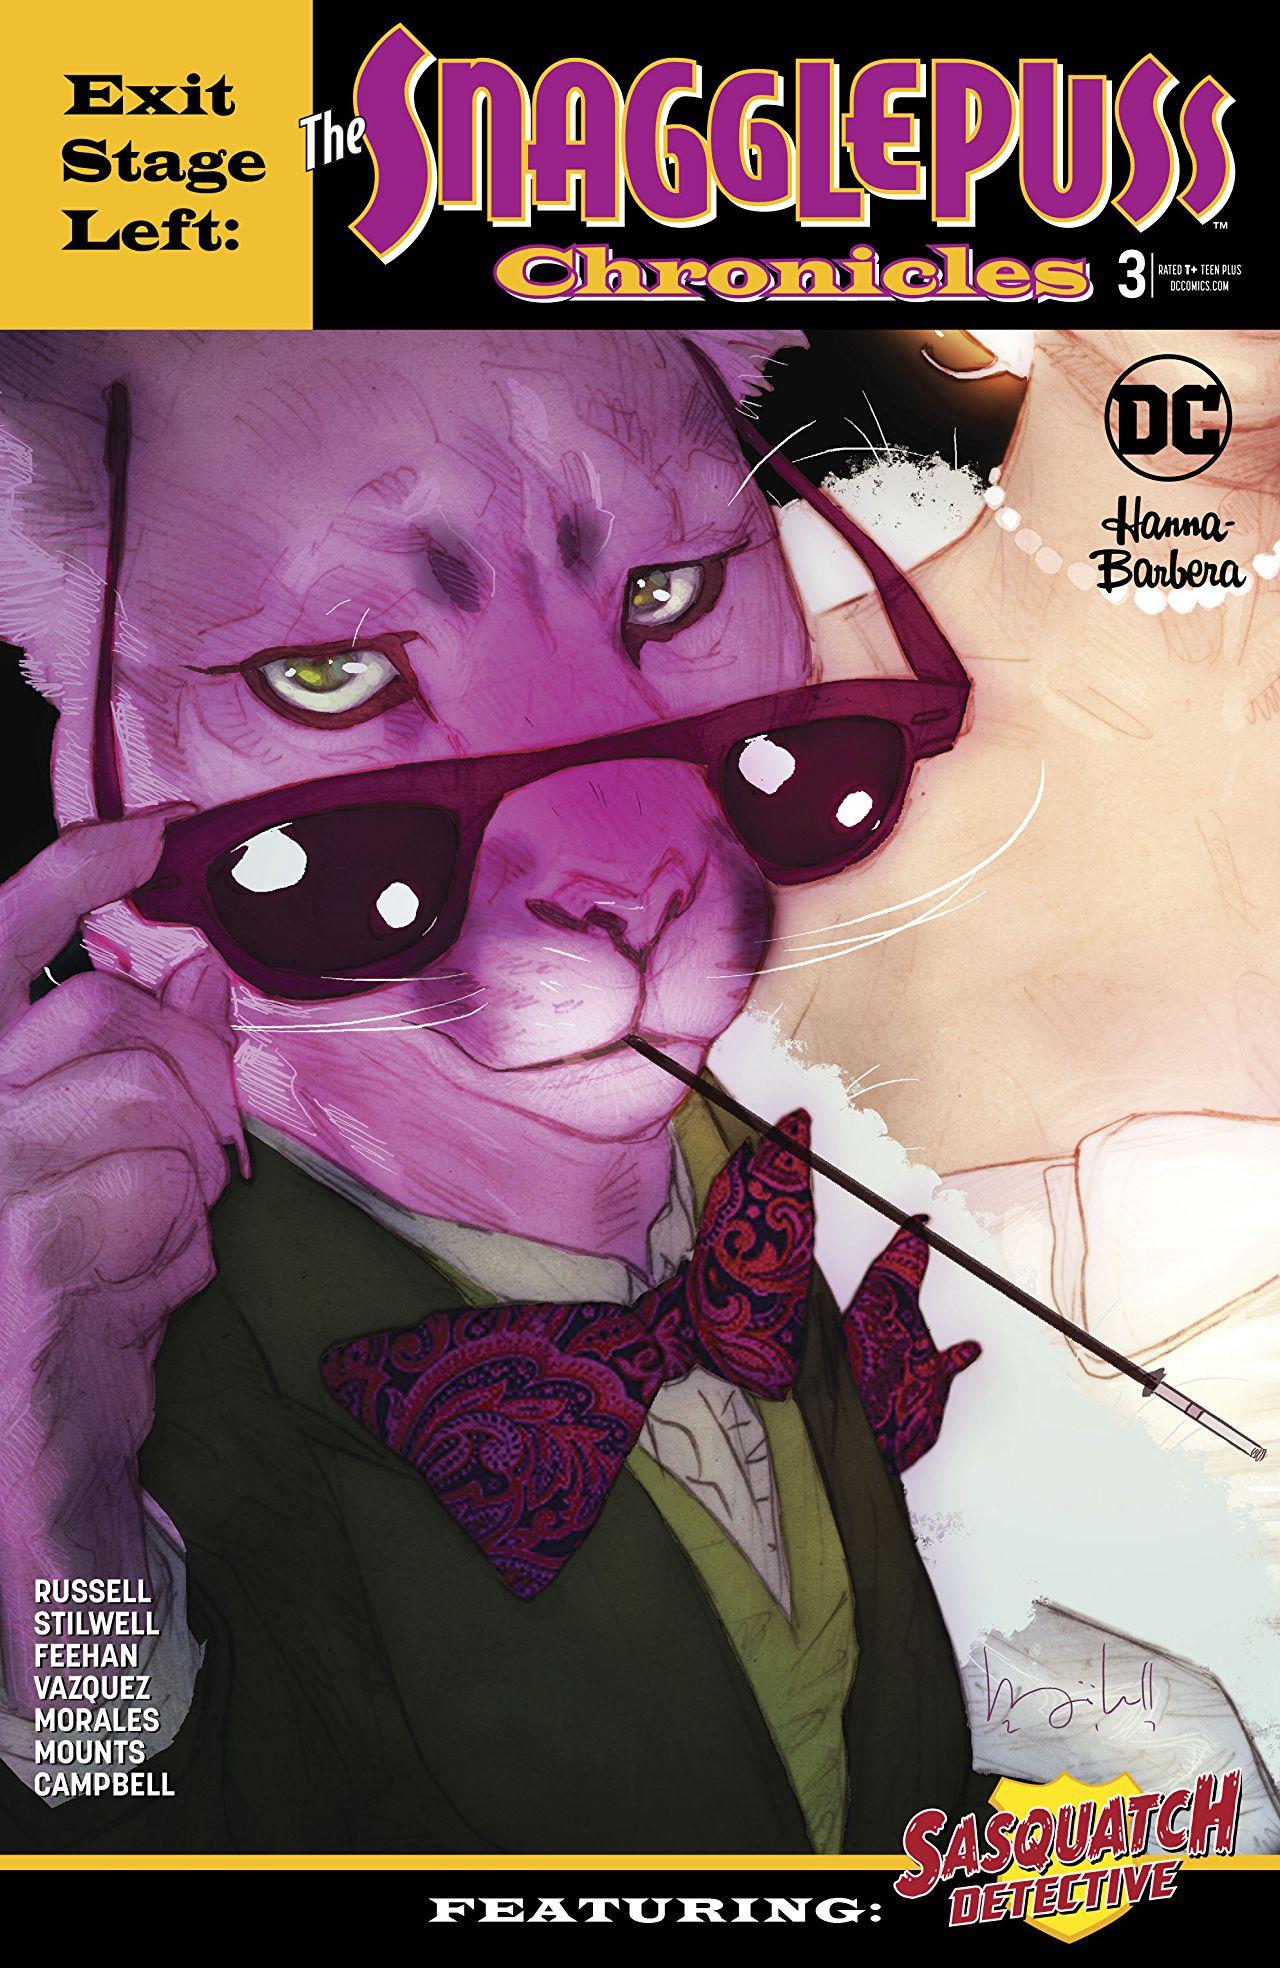 Exit Stage Left: The Snagglepuss Chronicles Vol. 1 #3